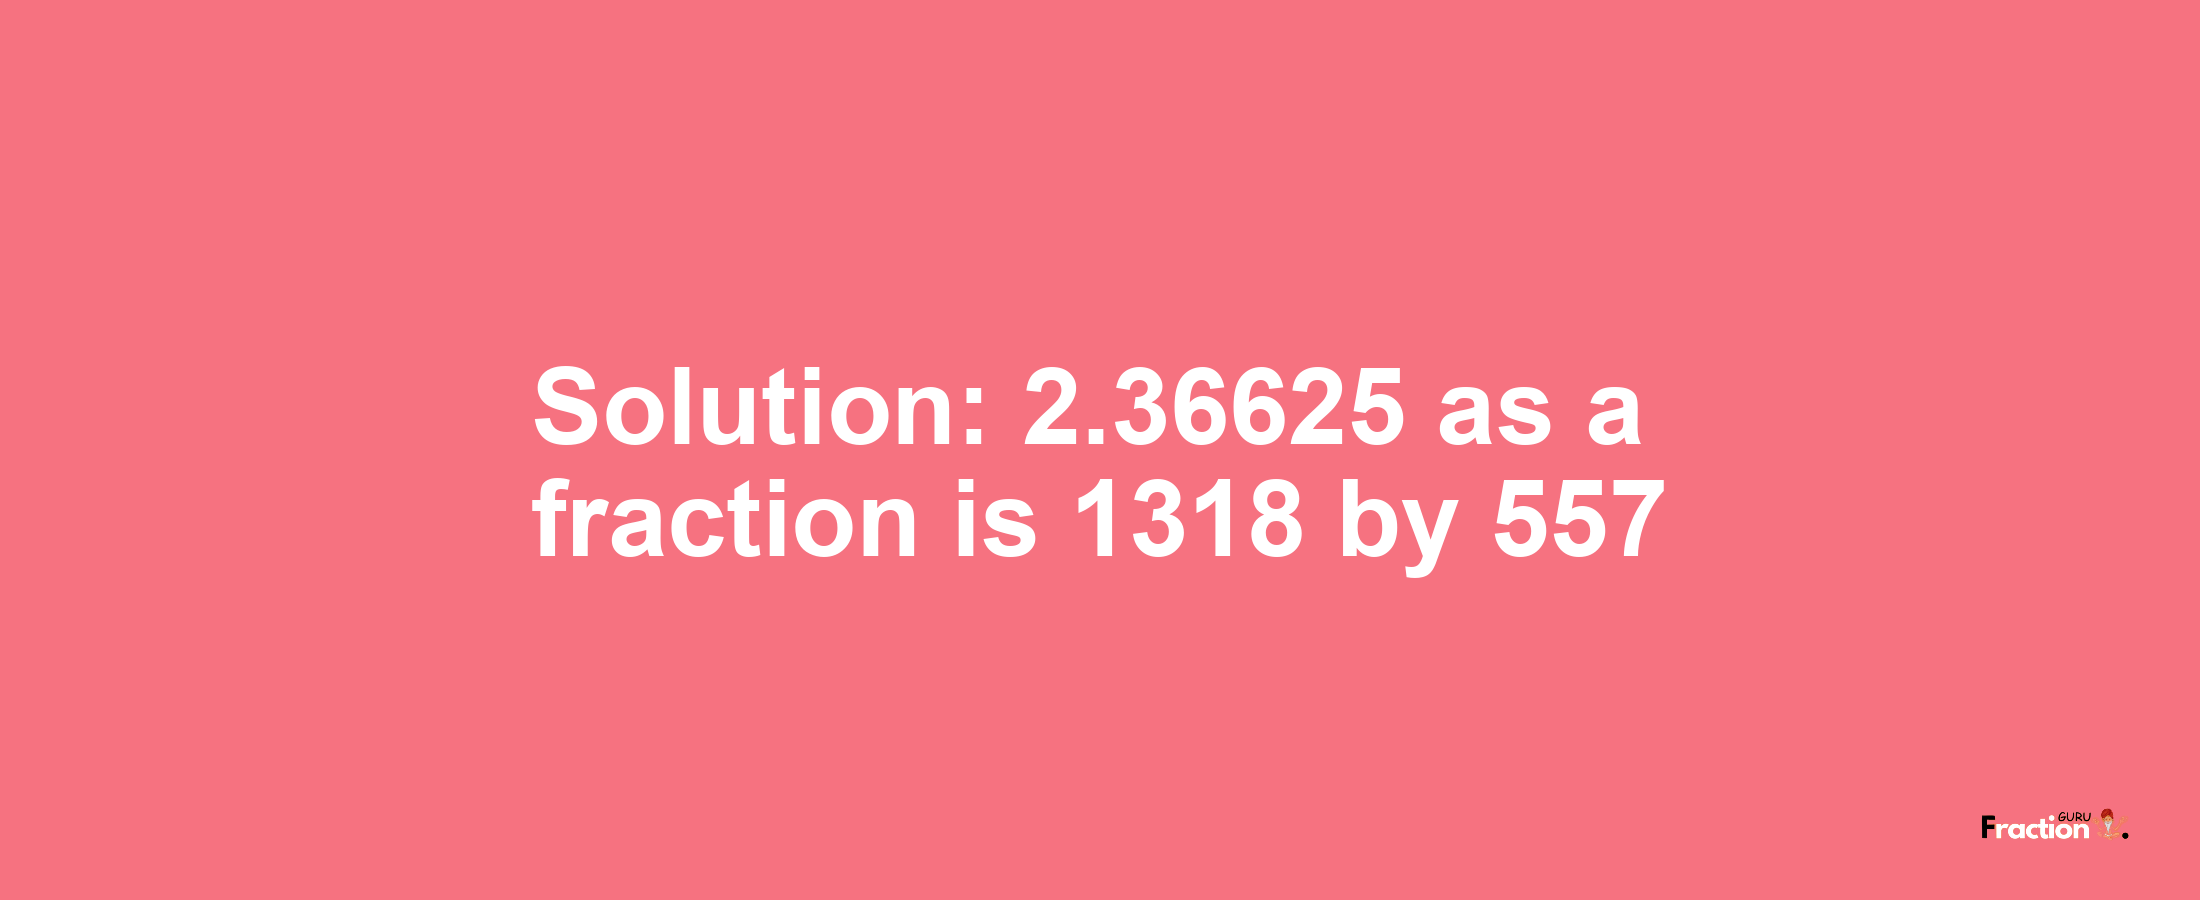 Solution:2.36625 as a fraction is 1318/557